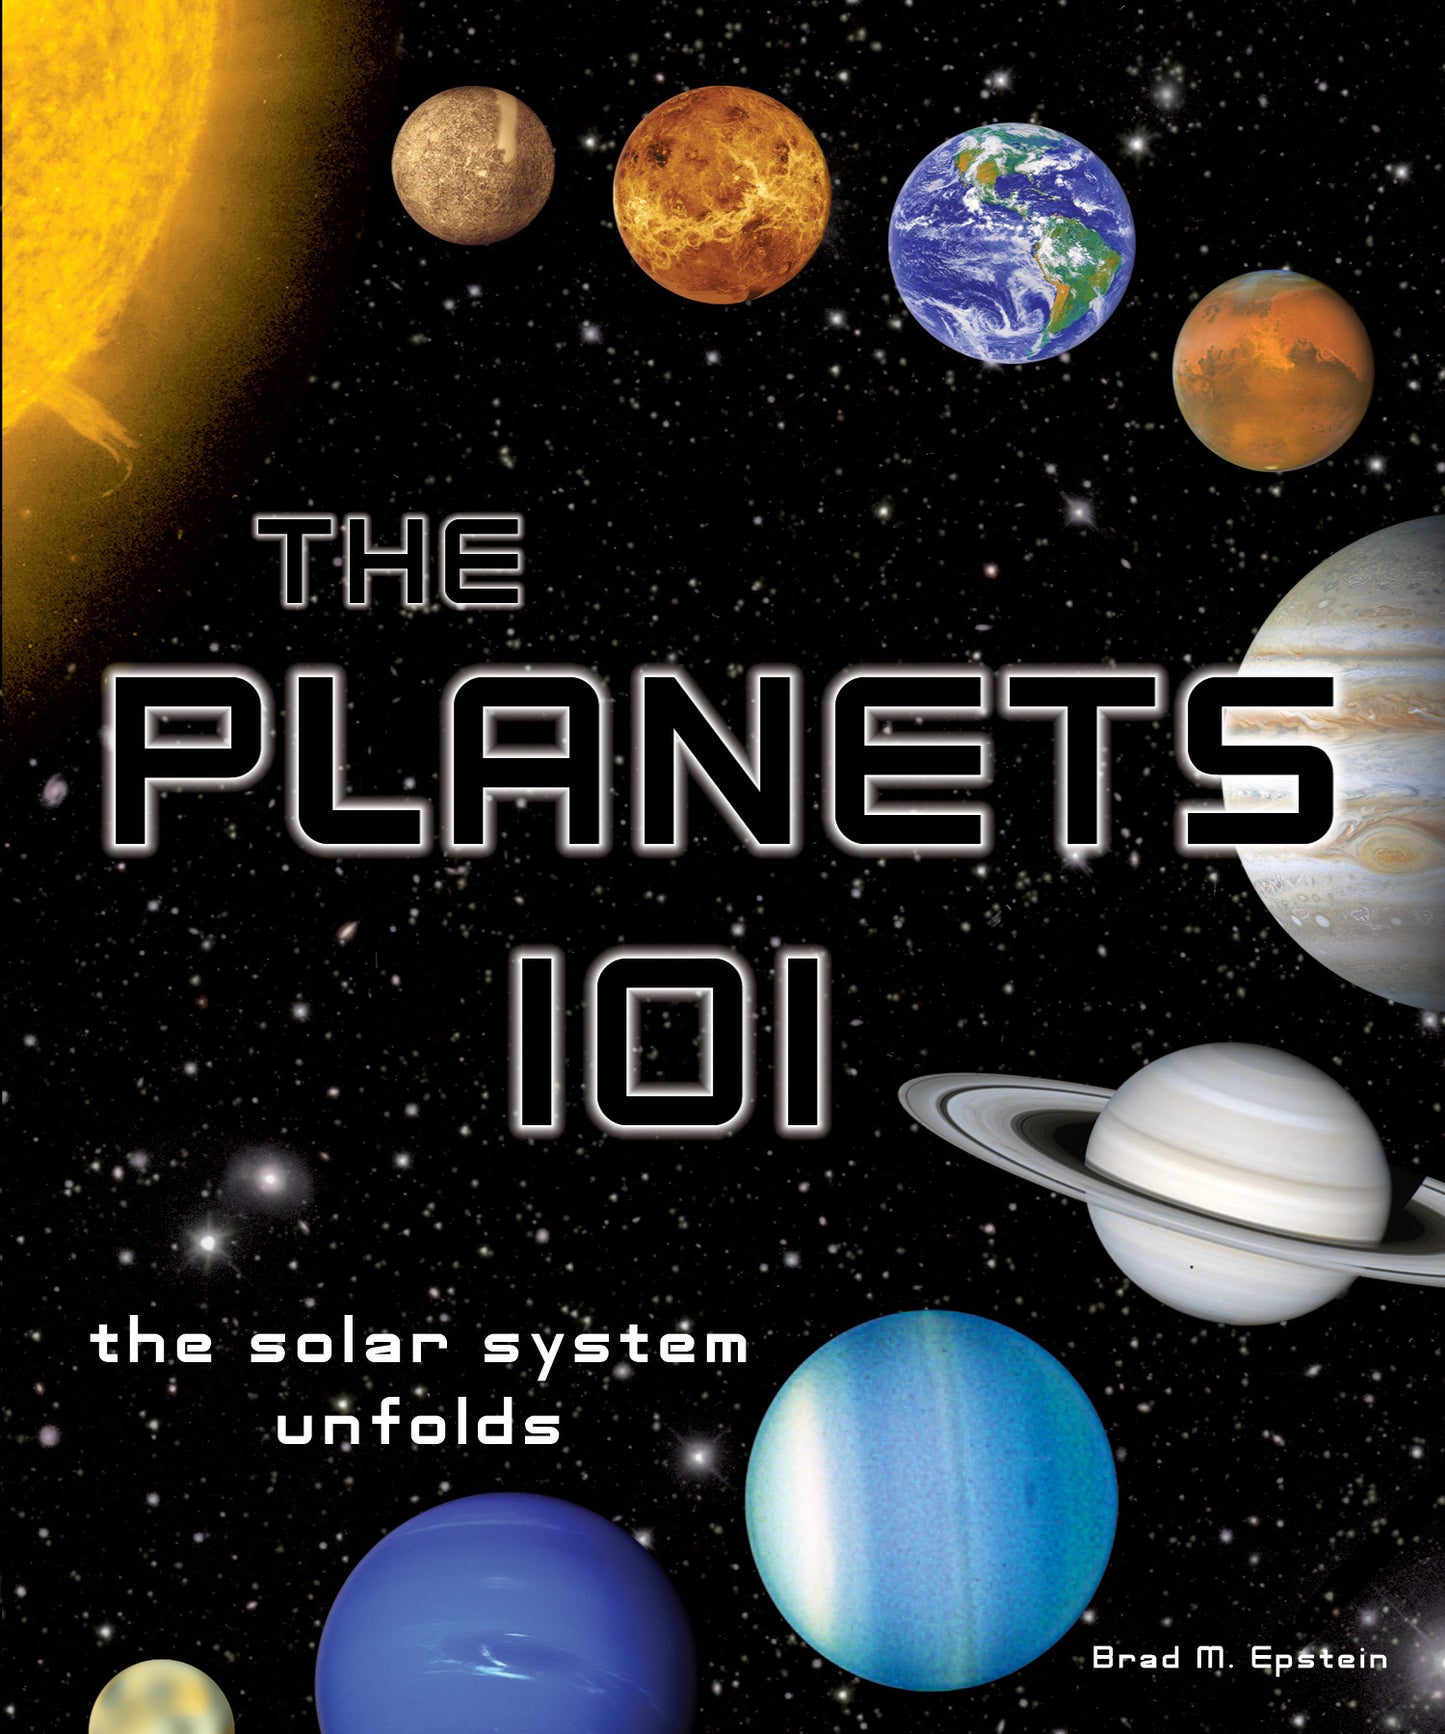 Planets 101 Book & Solar Baby Paper Gift Set